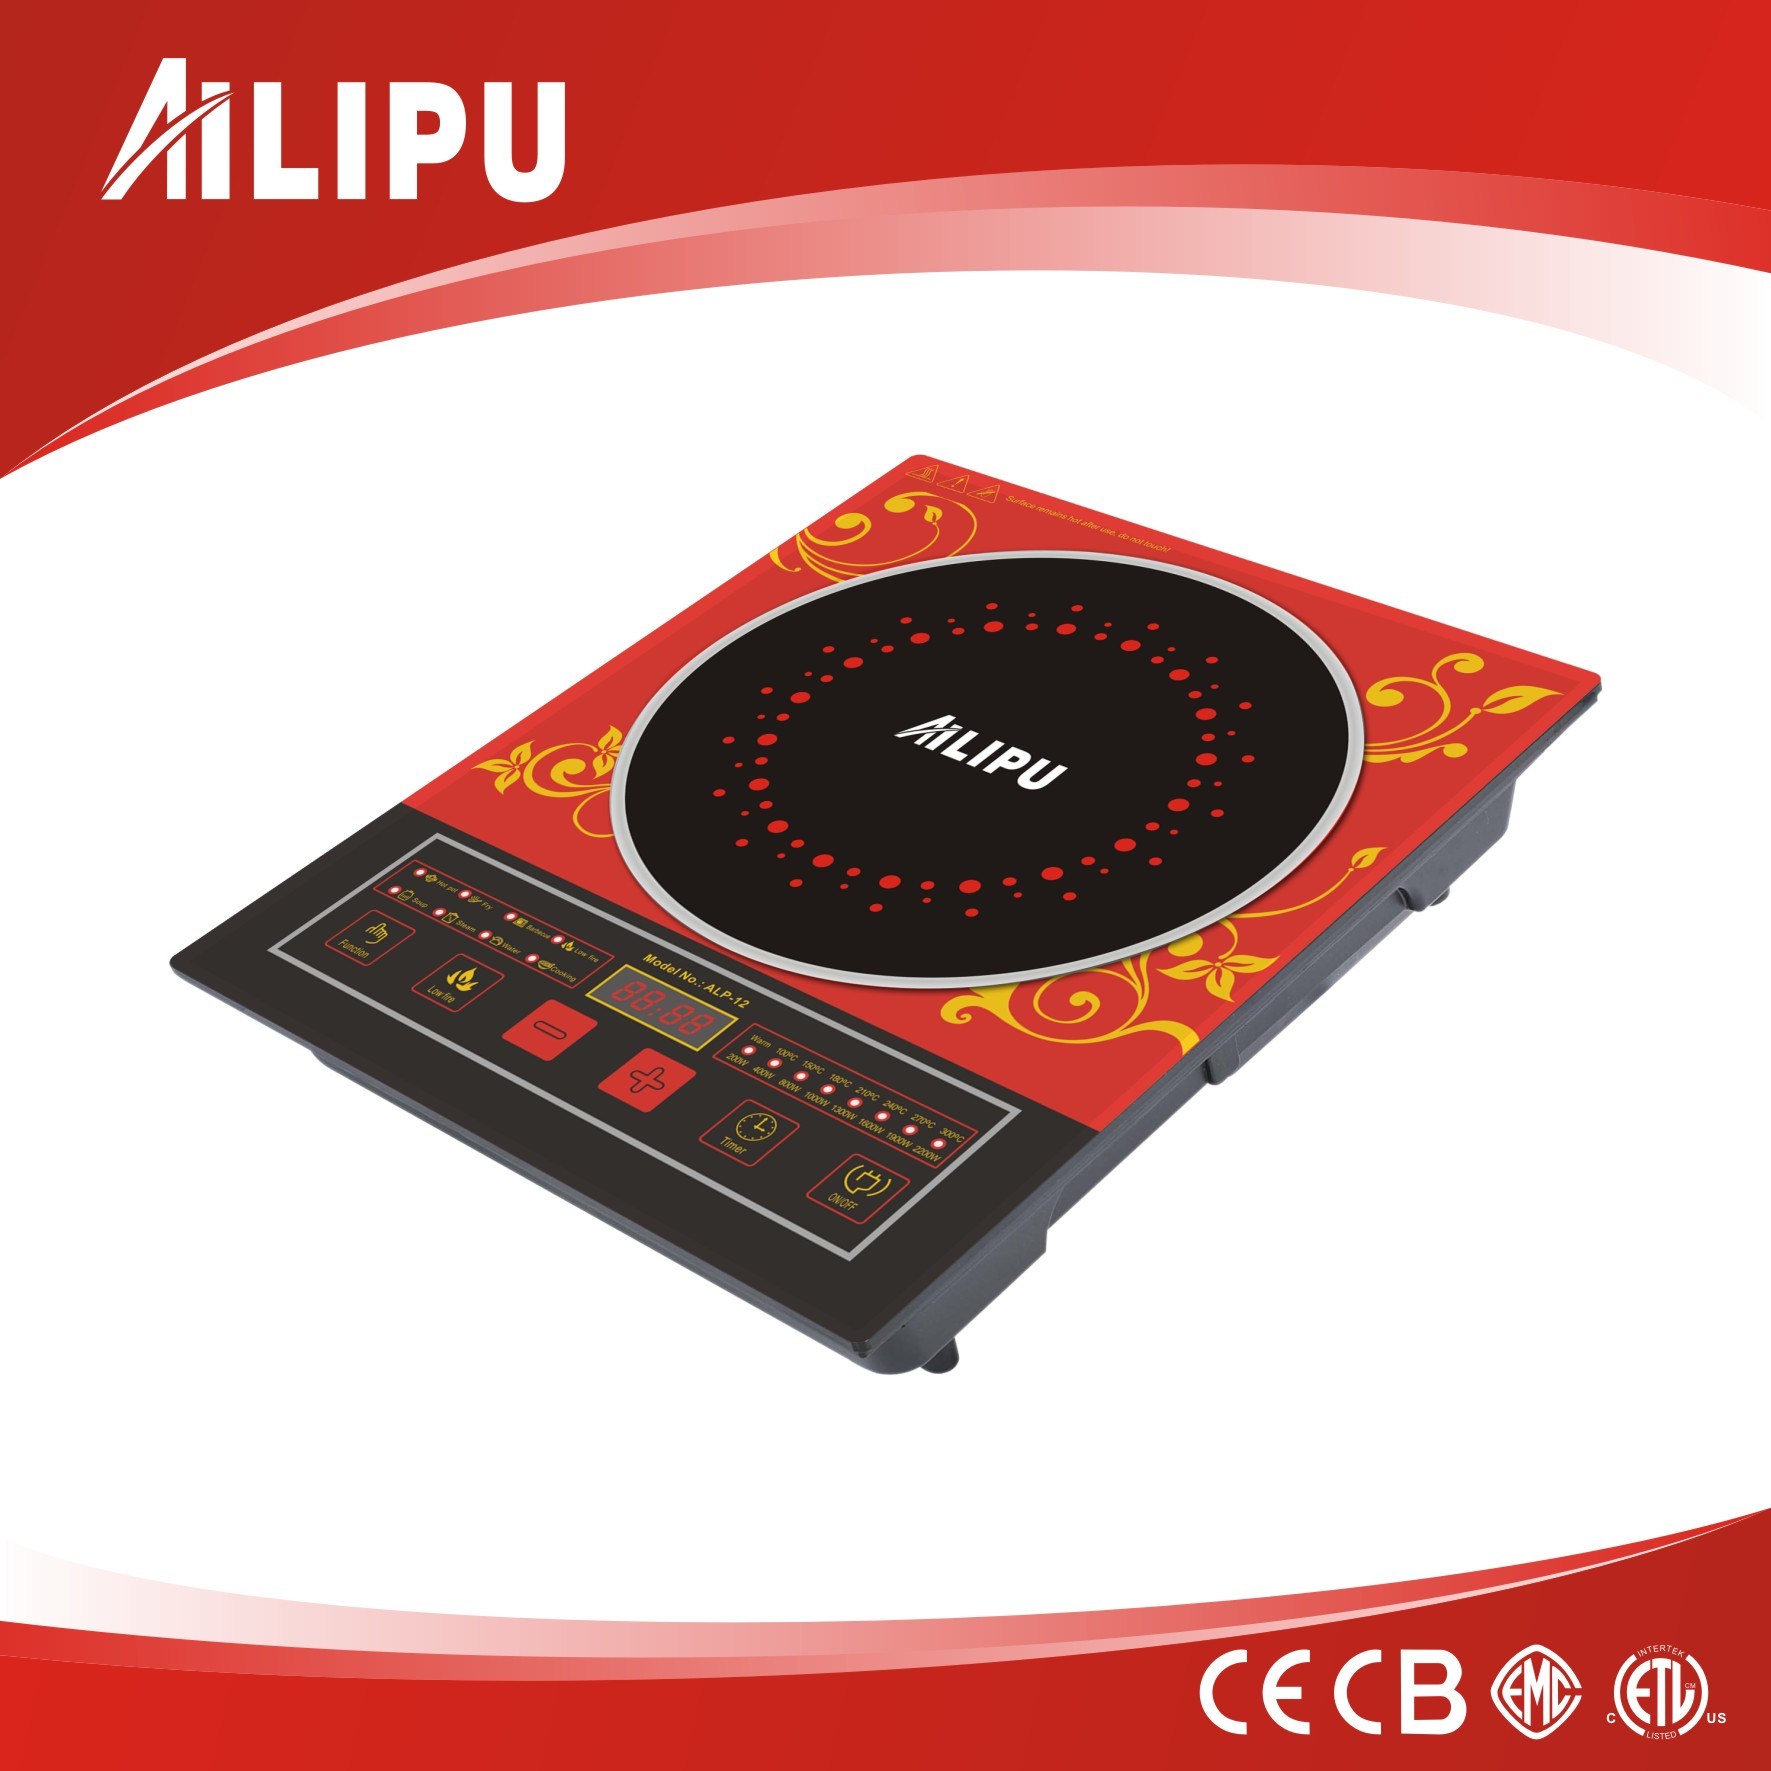 Alipu Hot Home Appliance, Induction Hob, Kitchenware, Electric Cooking Plate (APL-A12)